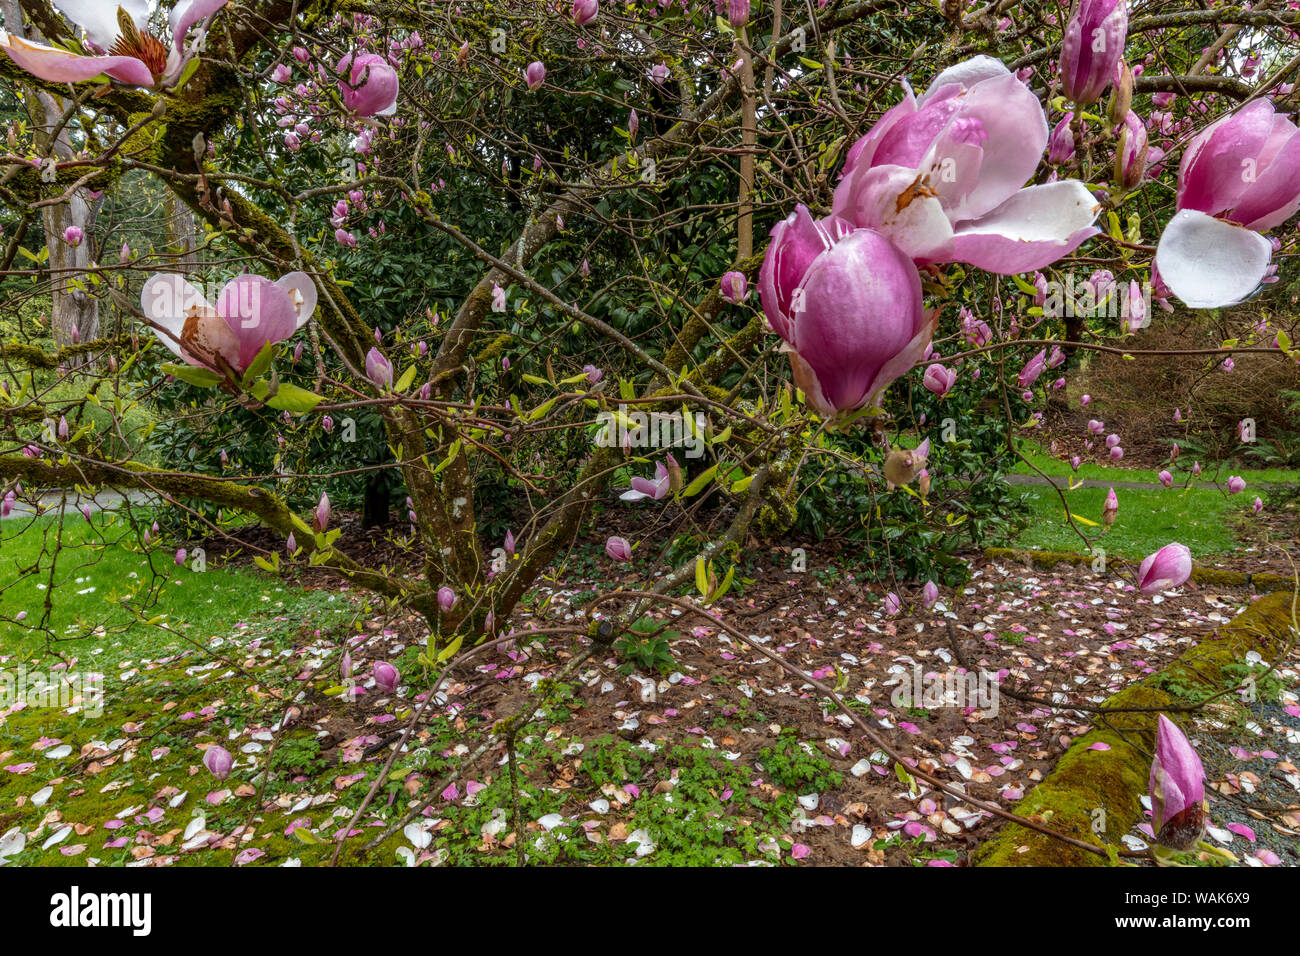 Magnolia tree in spring bloom at the Arboretum in Seattle, Washington State, USA Stock Photo